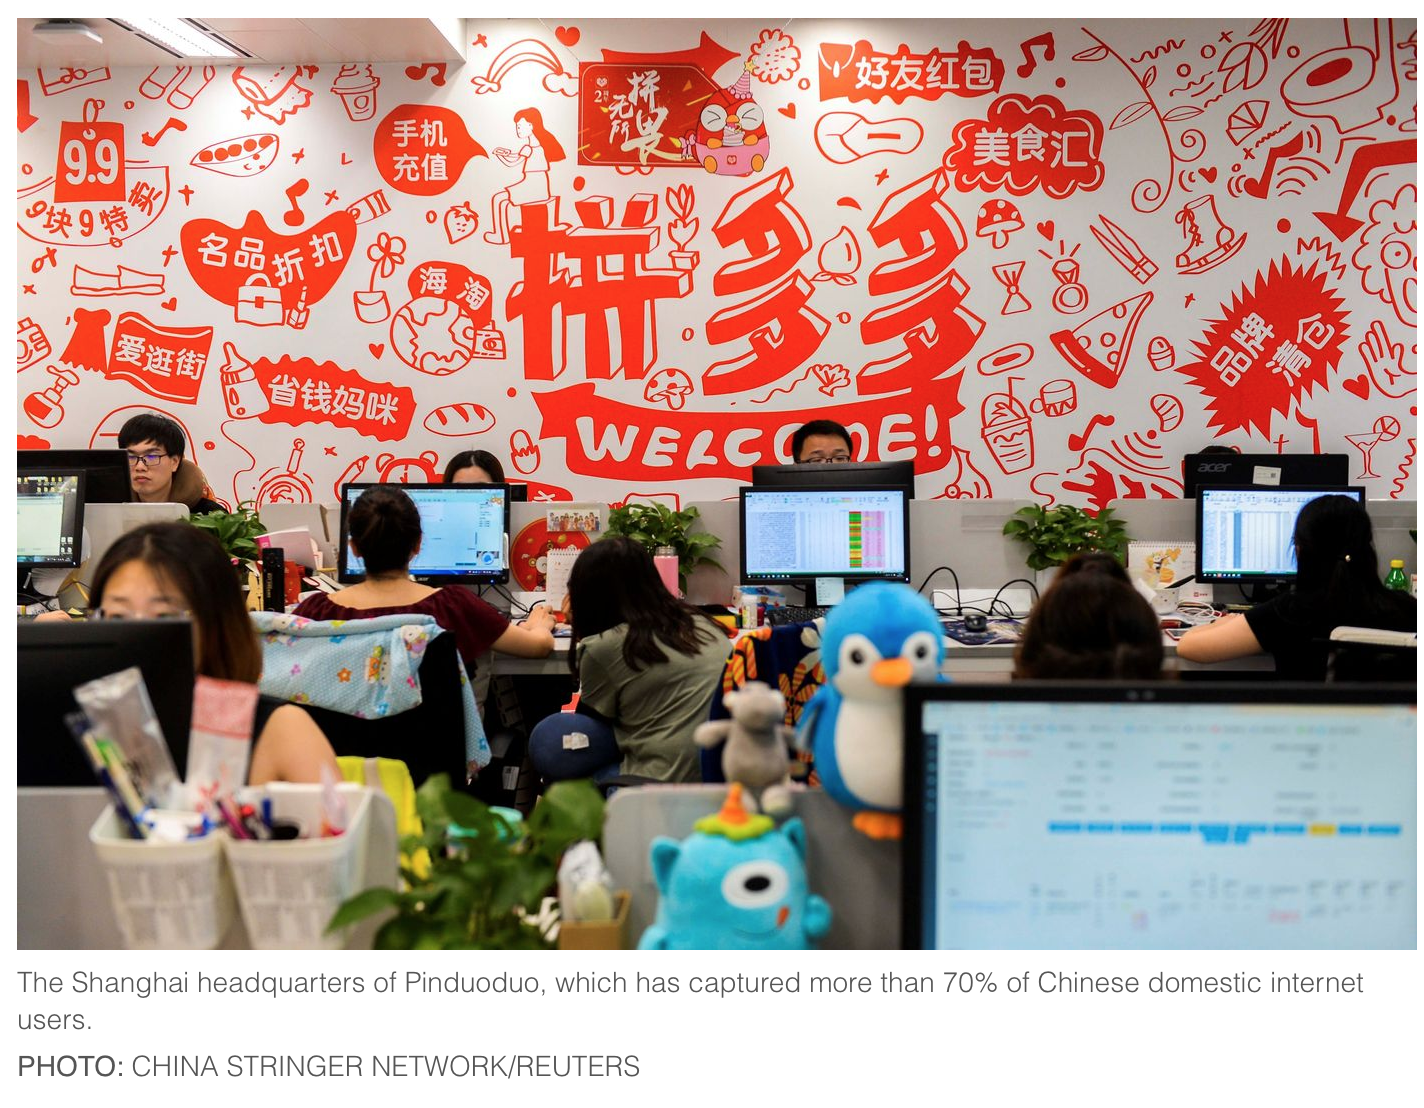 American Bargain Hunters Flock To A New Online Platform Forged In China